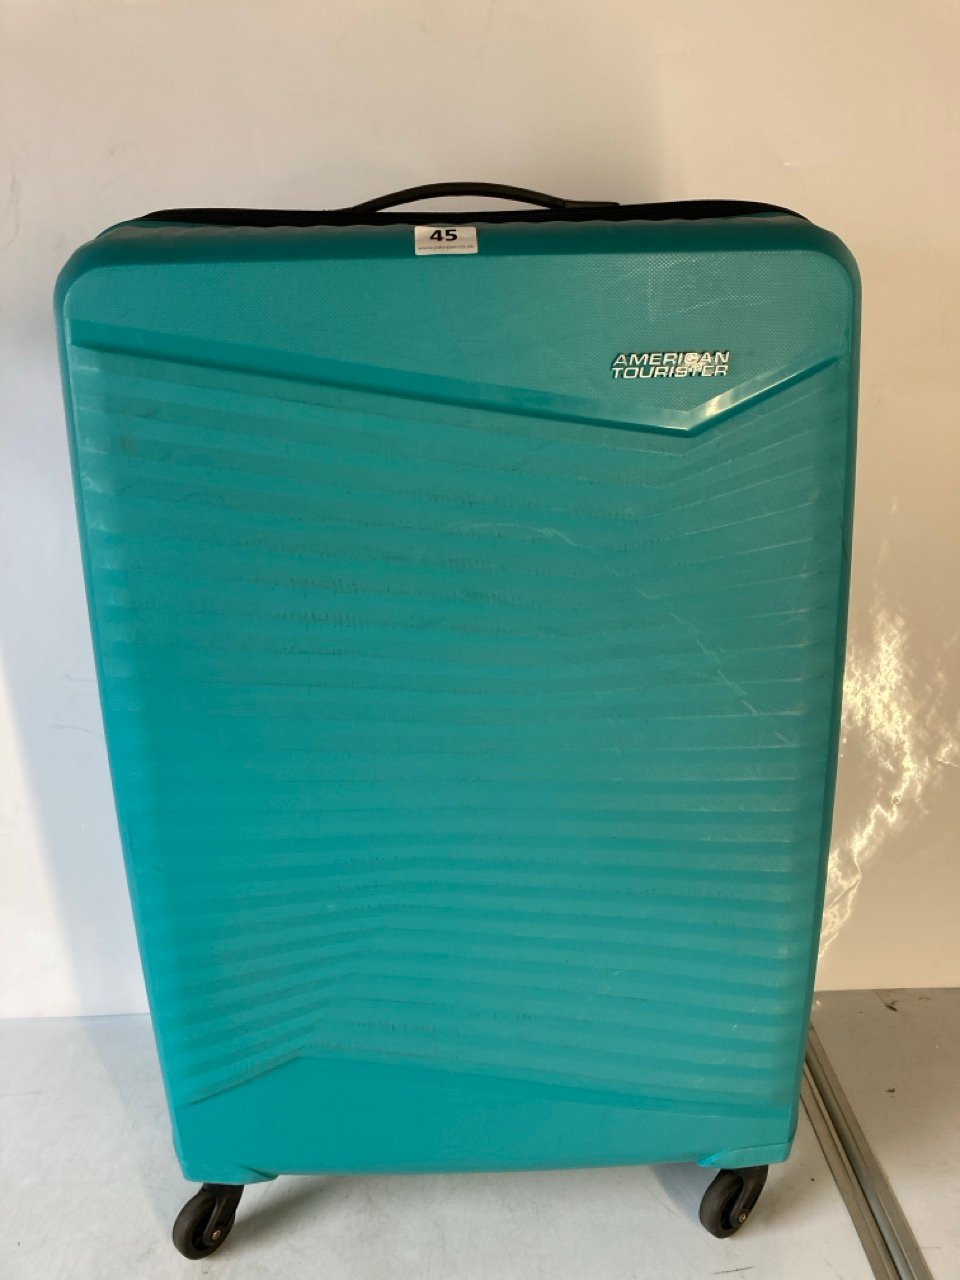 AN AMERICAN TOURISTER SUITCASE